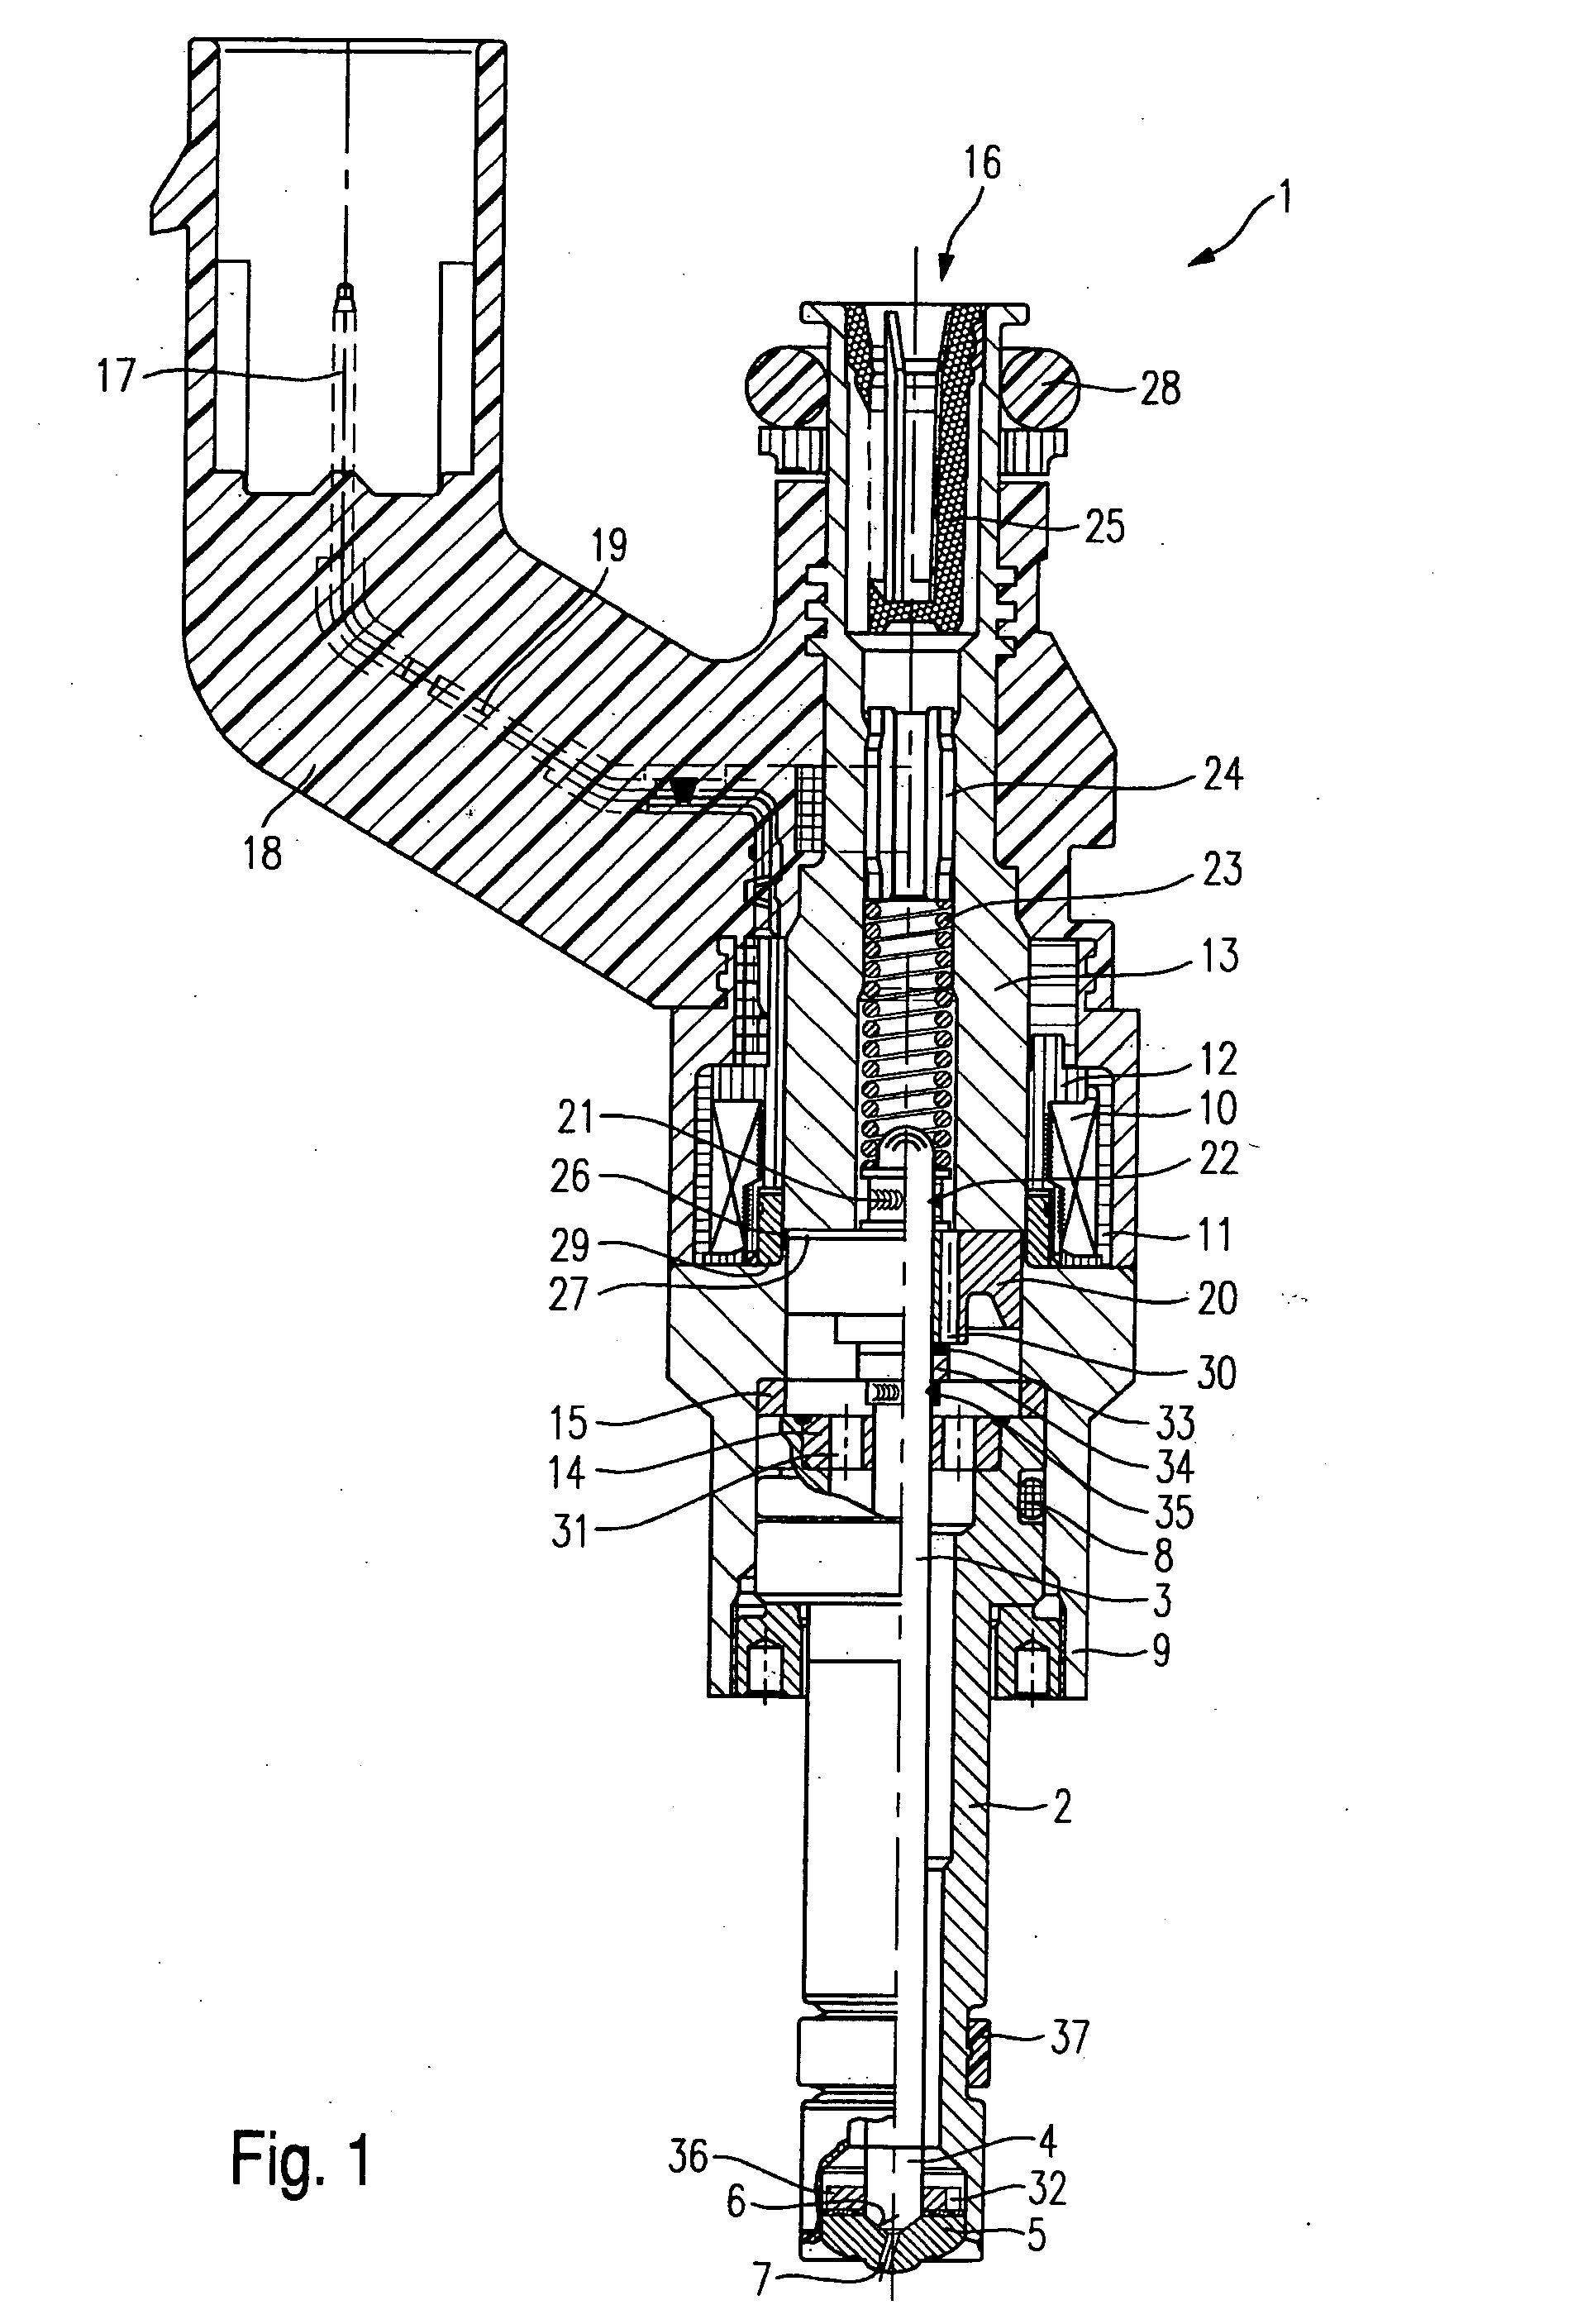 Fuel Injector Having an Integrated Ignition Device